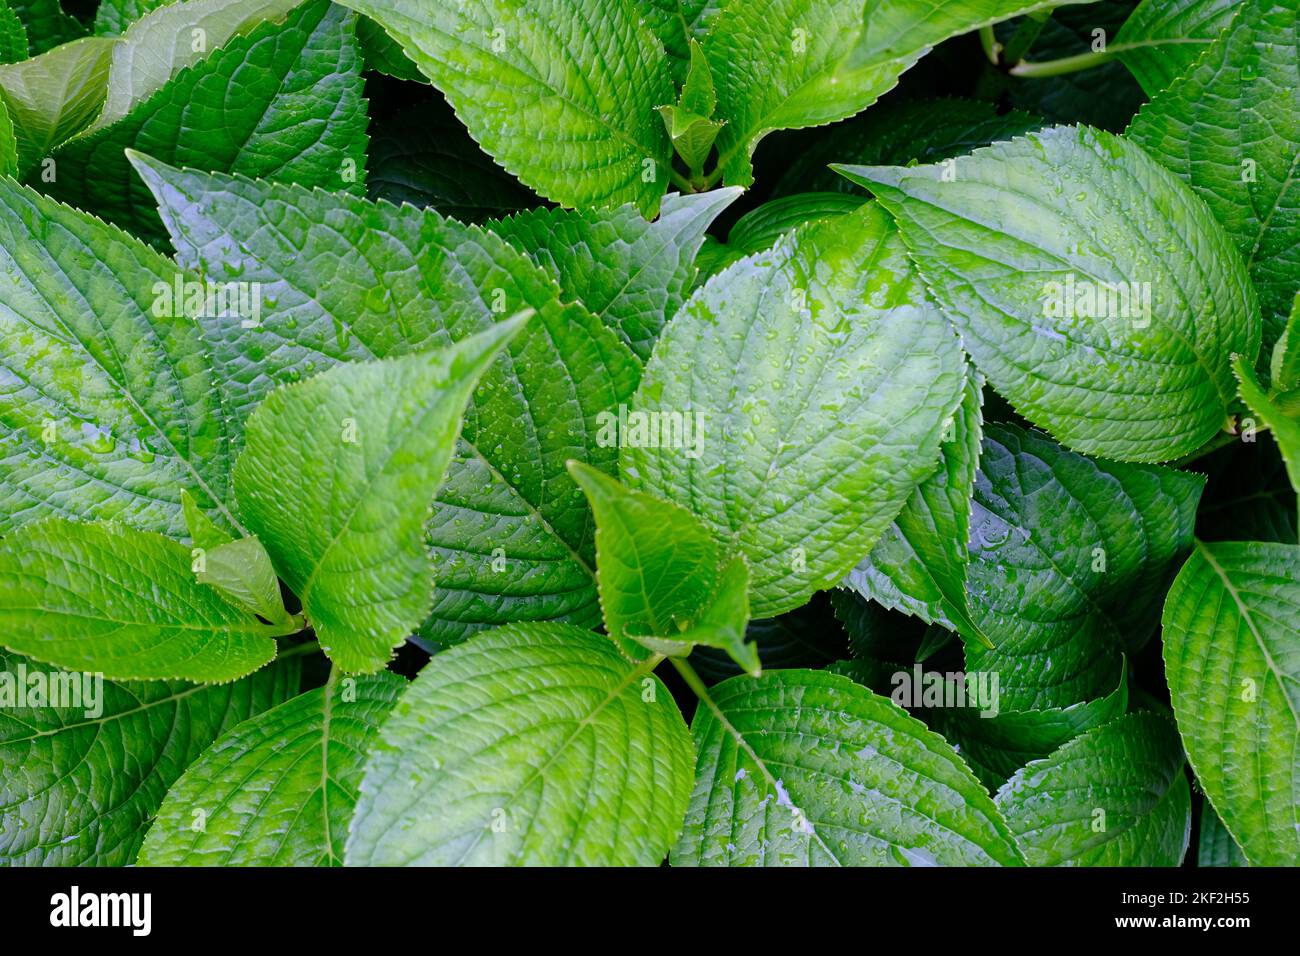 Fresh looking green leaves on garden plant. Green and vibrant with water droplets. Background image. Stock Photo